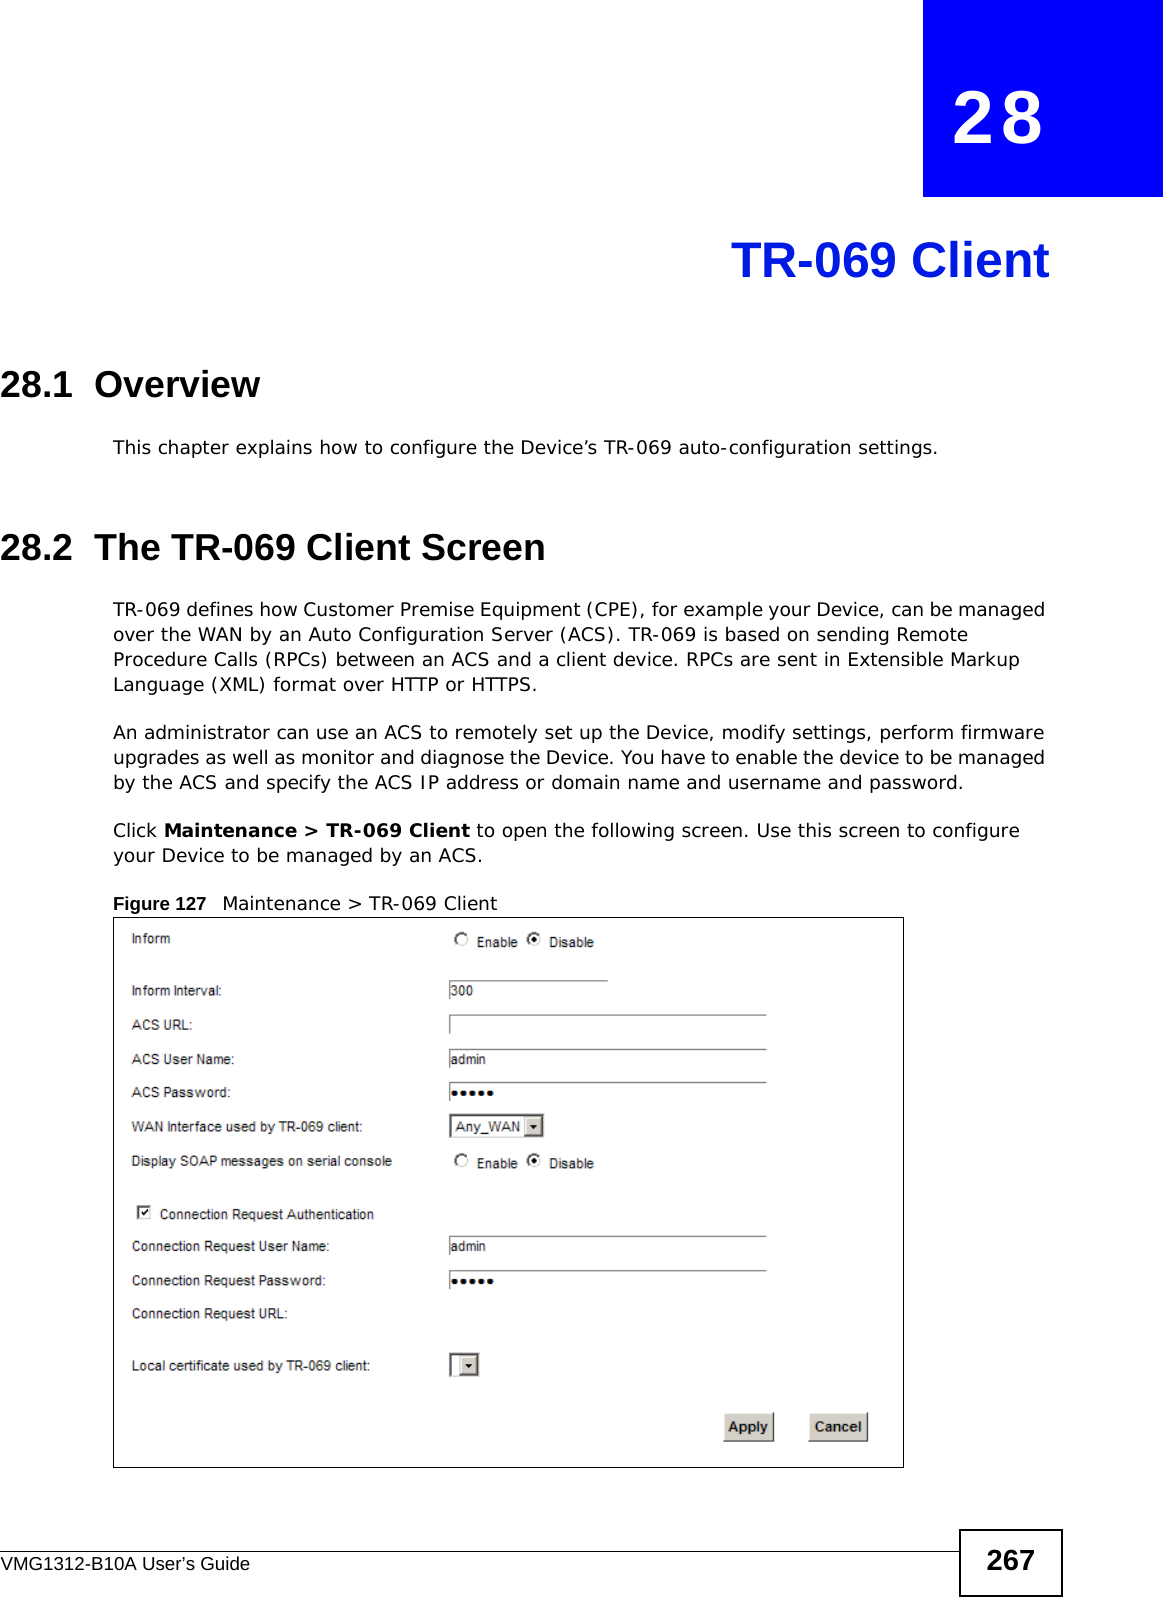 VMG1312-B10A User’s Guide 267CHAPTER   28TR-069 Client28.1  OverviewThis chapter explains how to configure the Device’s TR-069 auto-configuration settings.28.2  The TR-069 Client ScreenTR-069 defines how Customer Premise Equipment (CPE), for example your Device, can be managed over the WAN by an Auto Configuration Server (ACS). TR-069 is based on sending Remote Procedure Calls (RPCs) between an ACS and a client device. RPCs are sent in Extensible Markup Language (XML) format over HTTP or HTTPS. An administrator can use an ACS to remotely set up the Device, modify settings, perform firmware upgrades as well as monitor and diagnose the Device. You have to enable the device to be managed by the ACS and specify the ACS IP address or domain name and username and password.Click Maintenance &gt; TR-069 Client to open the following screen. Use this screen to configure your Device to be managed by an ACS. Figure 127   Maintenance &gt; TR-069 Client 